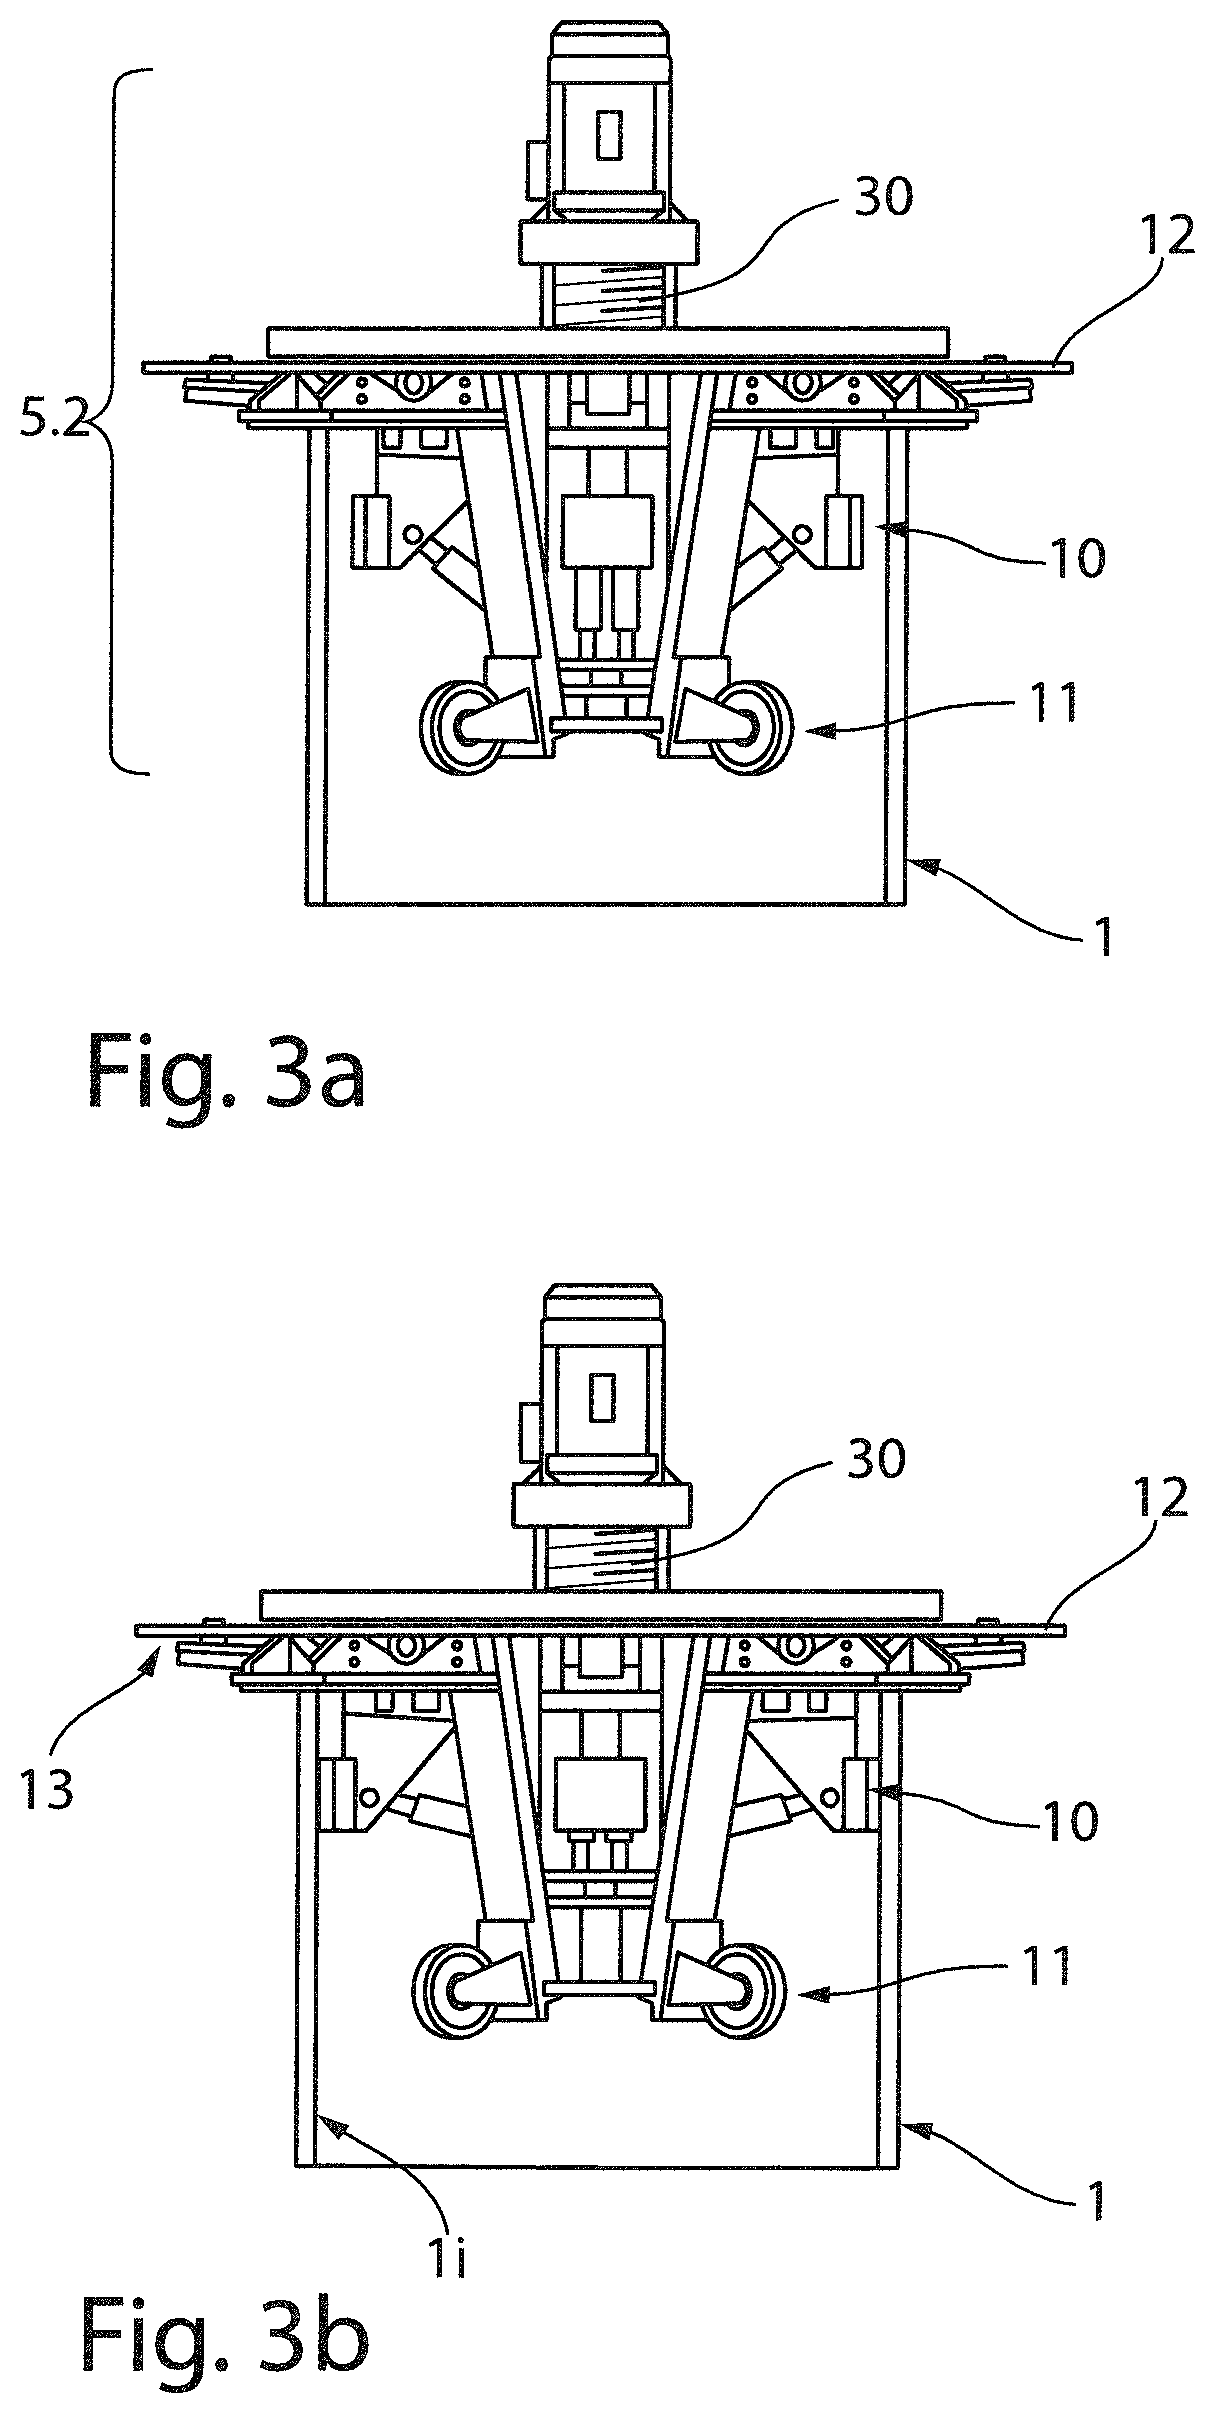 Welding assembly for permanent joining of a first tubular component with a second component